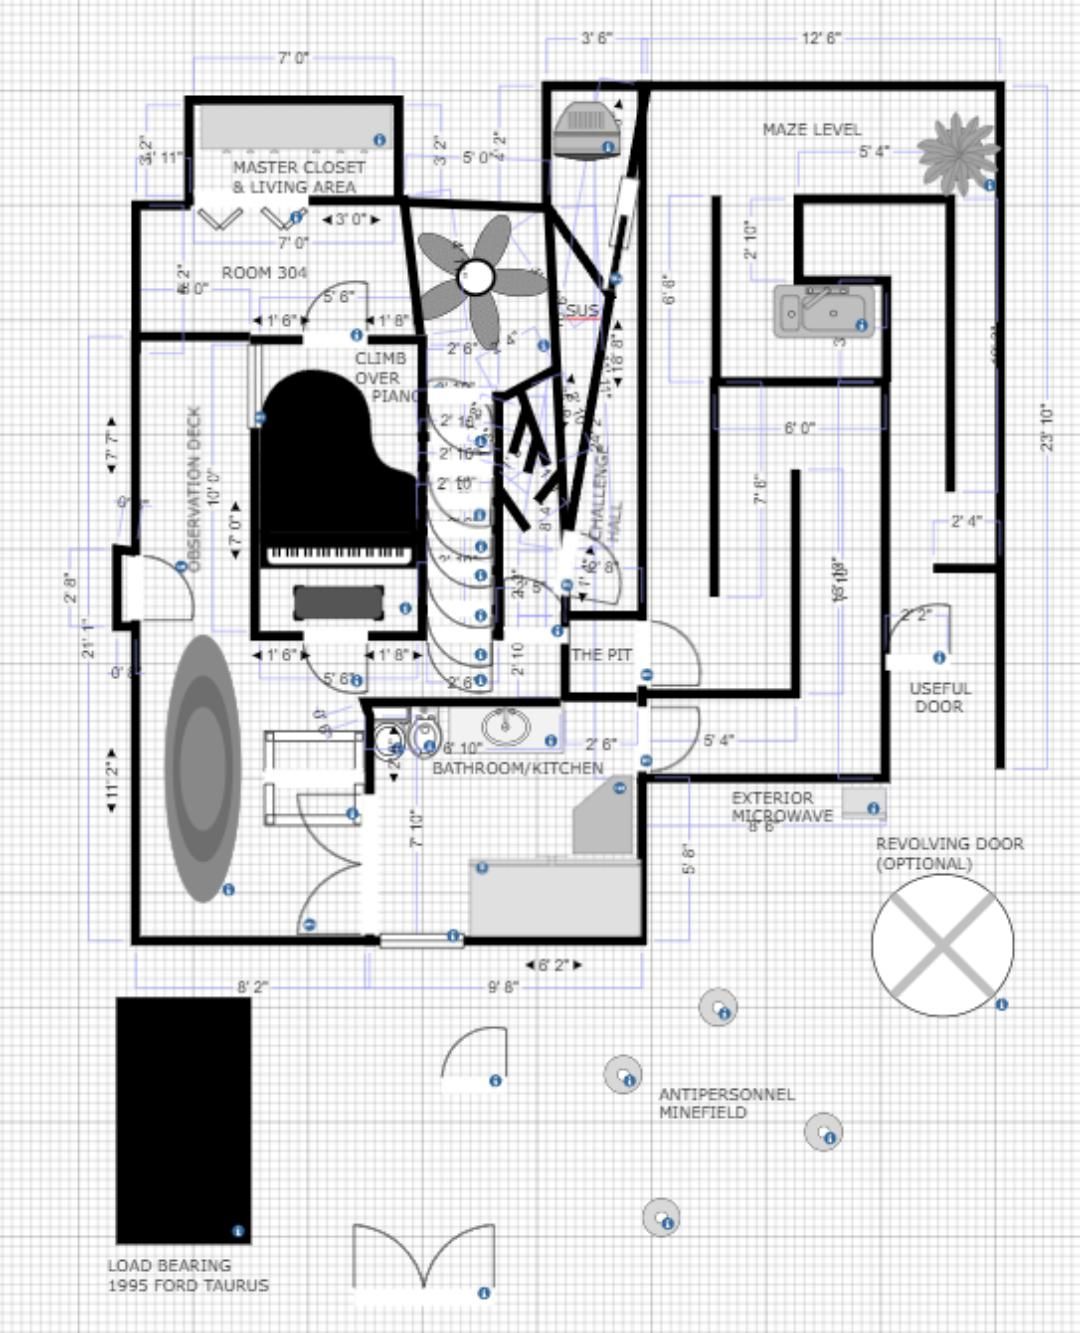 My friend designed a floor plan in 30 minutes